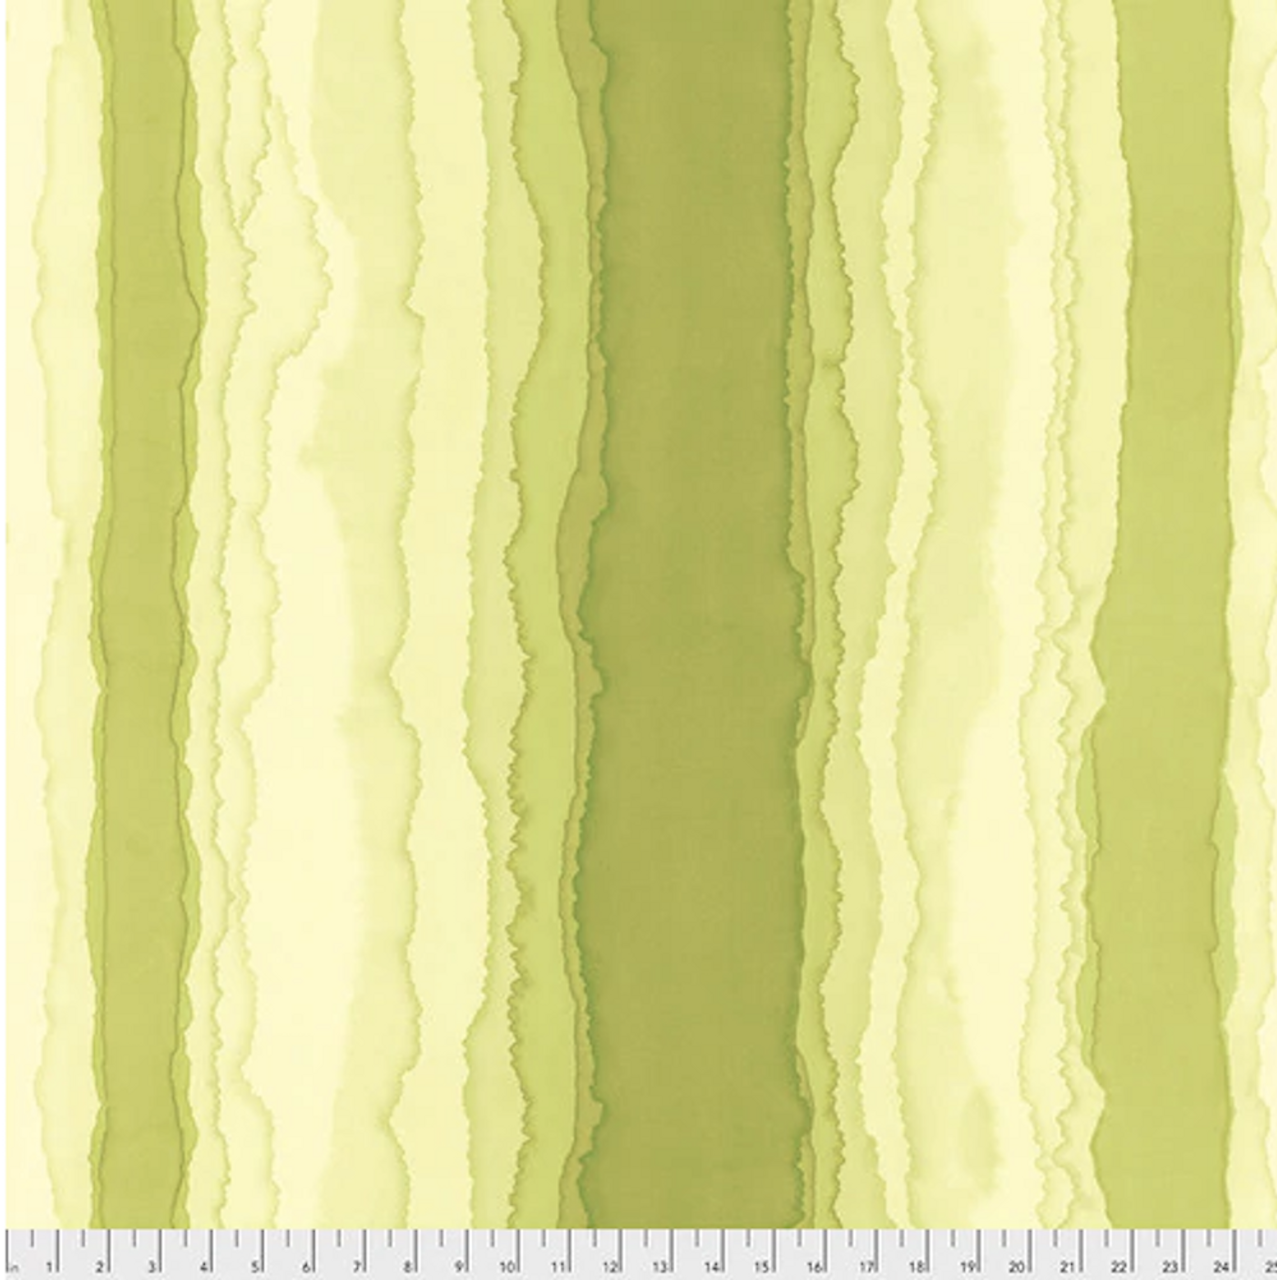 Free Spirit Designs PWFS051 Stratosphere Lime Cotton Blender Fabric By Yard